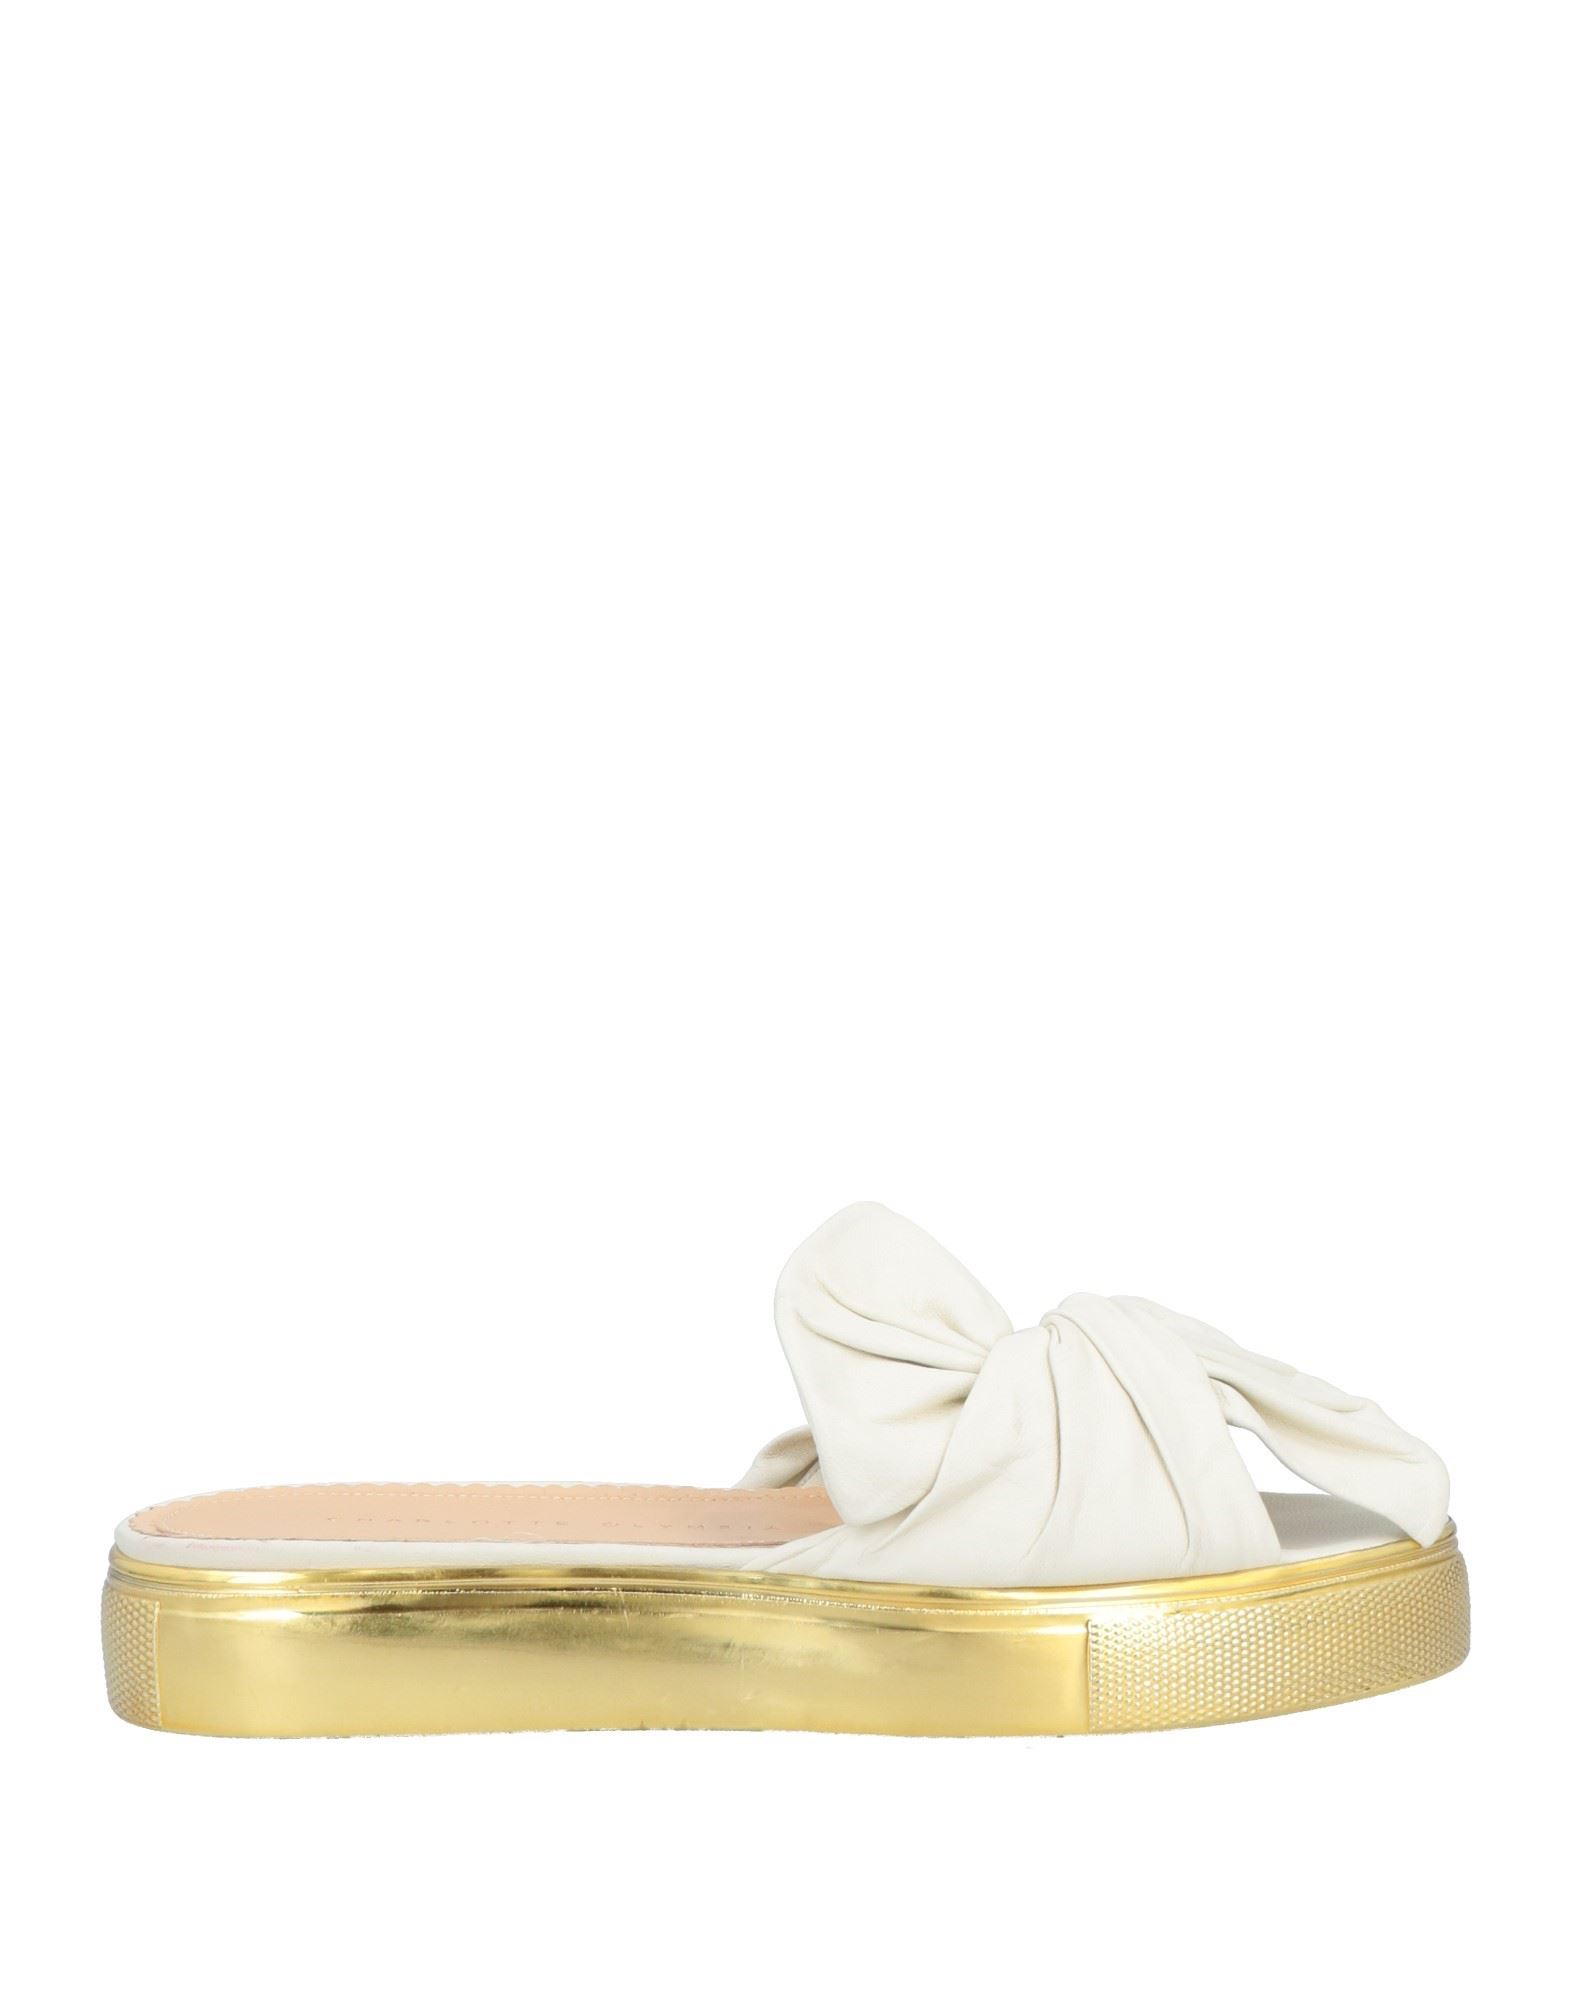 Charlotte Olympia Sandals In White